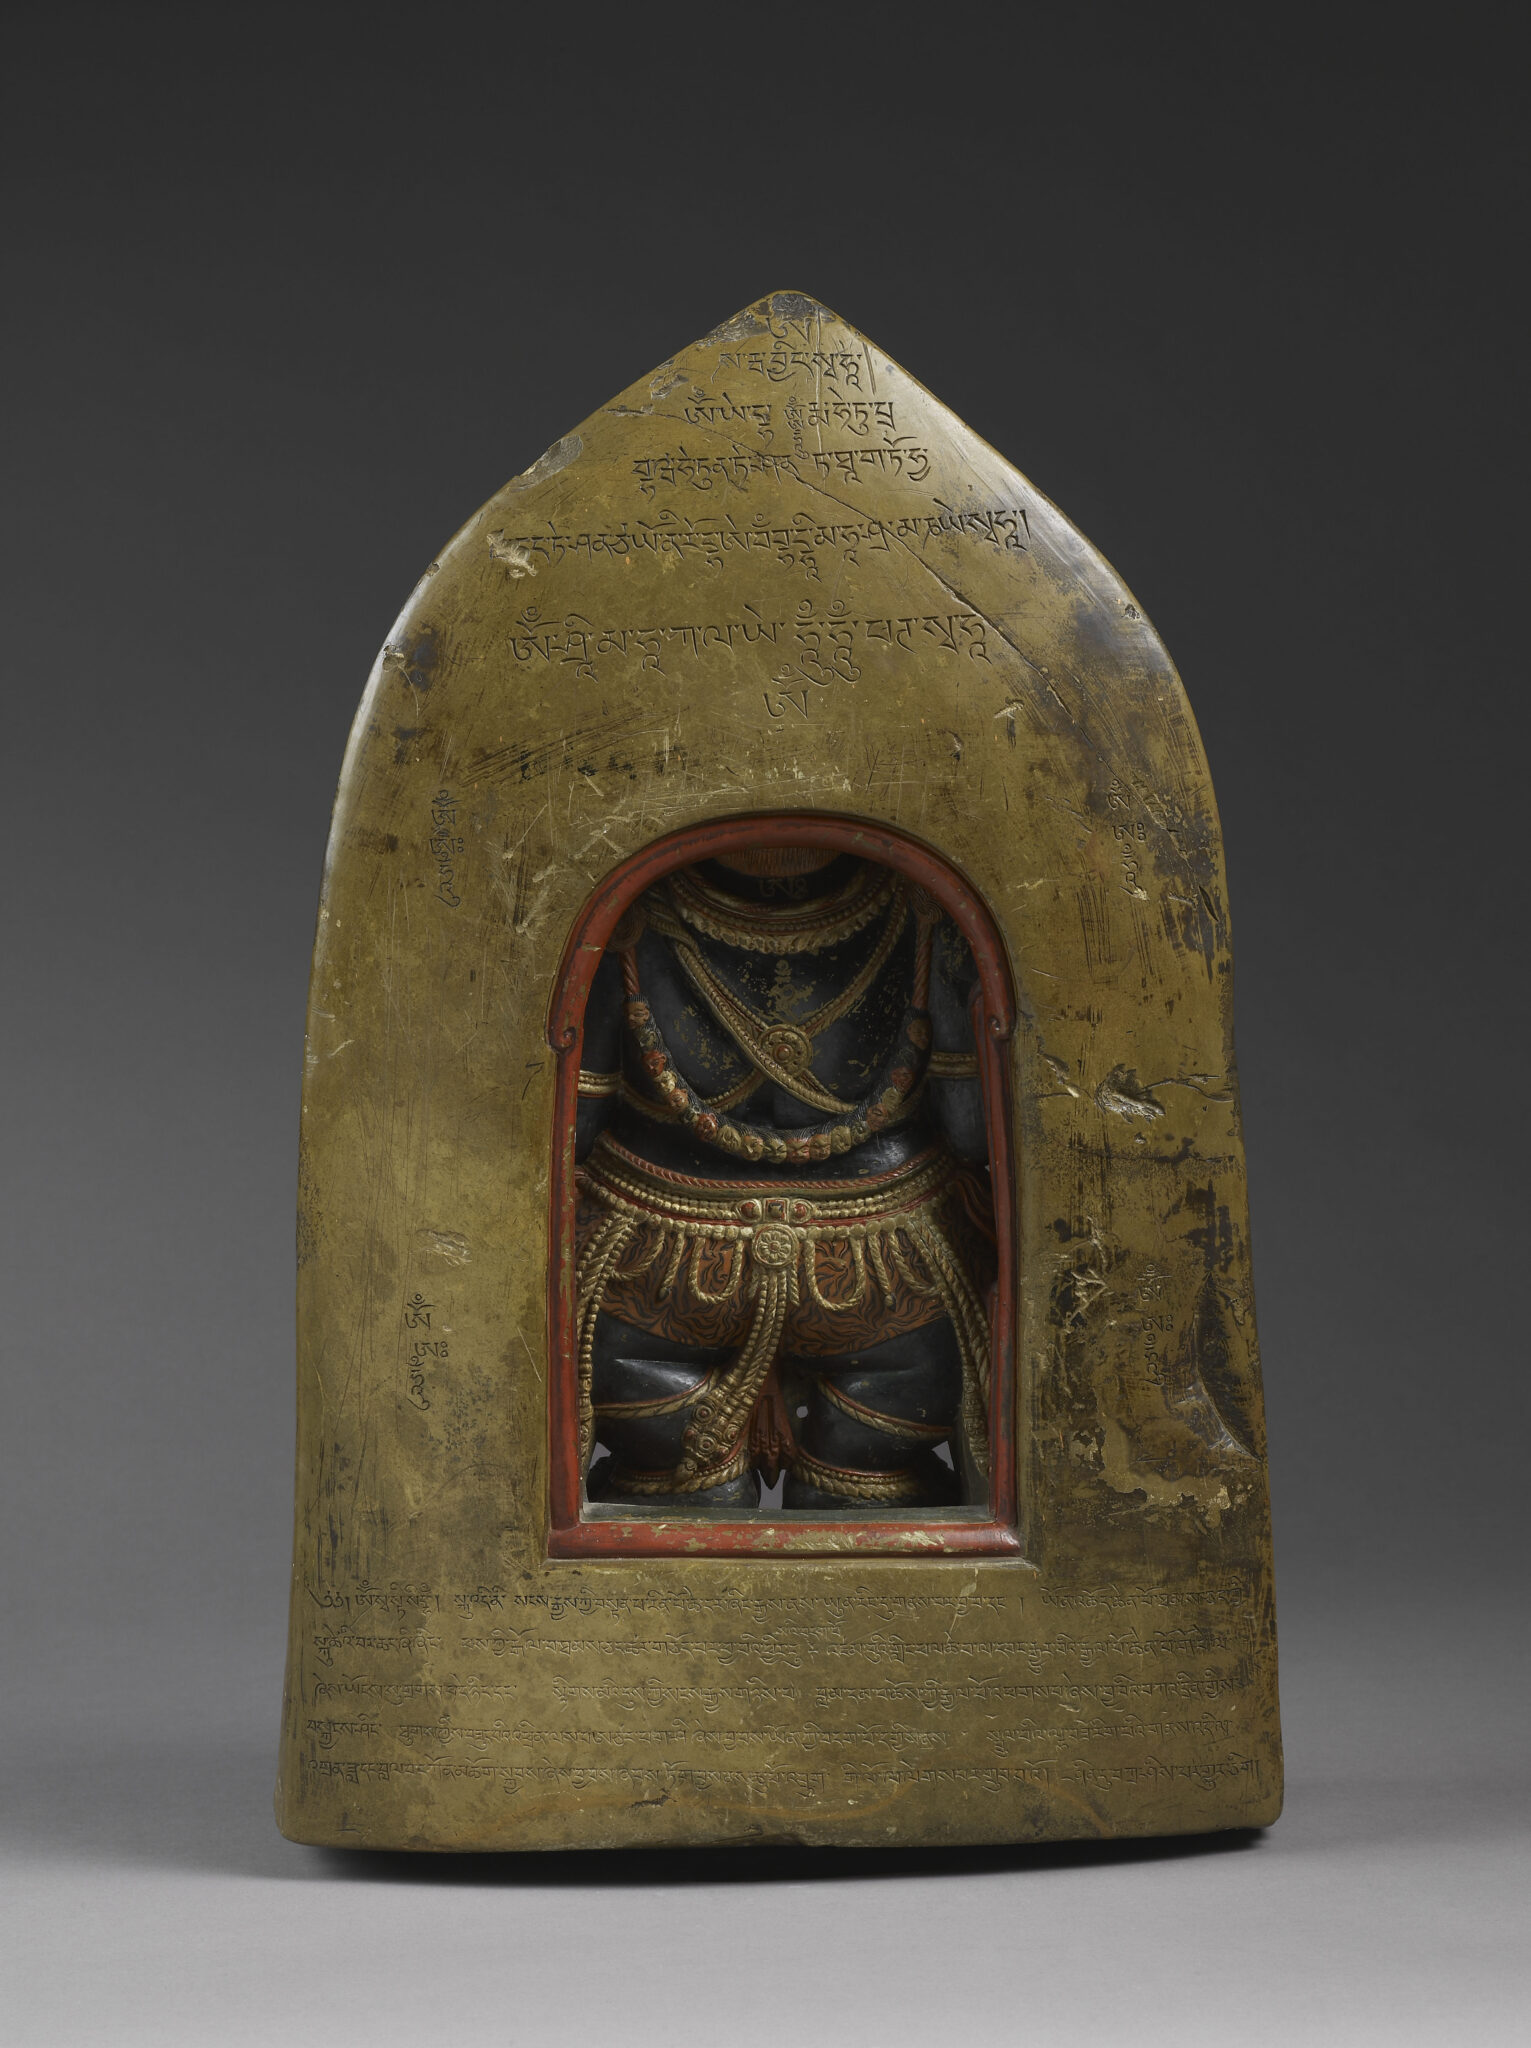 Back view of sculpture in pointed-arch shape featuring incised Tibetan script and cutout revealing backside of deity